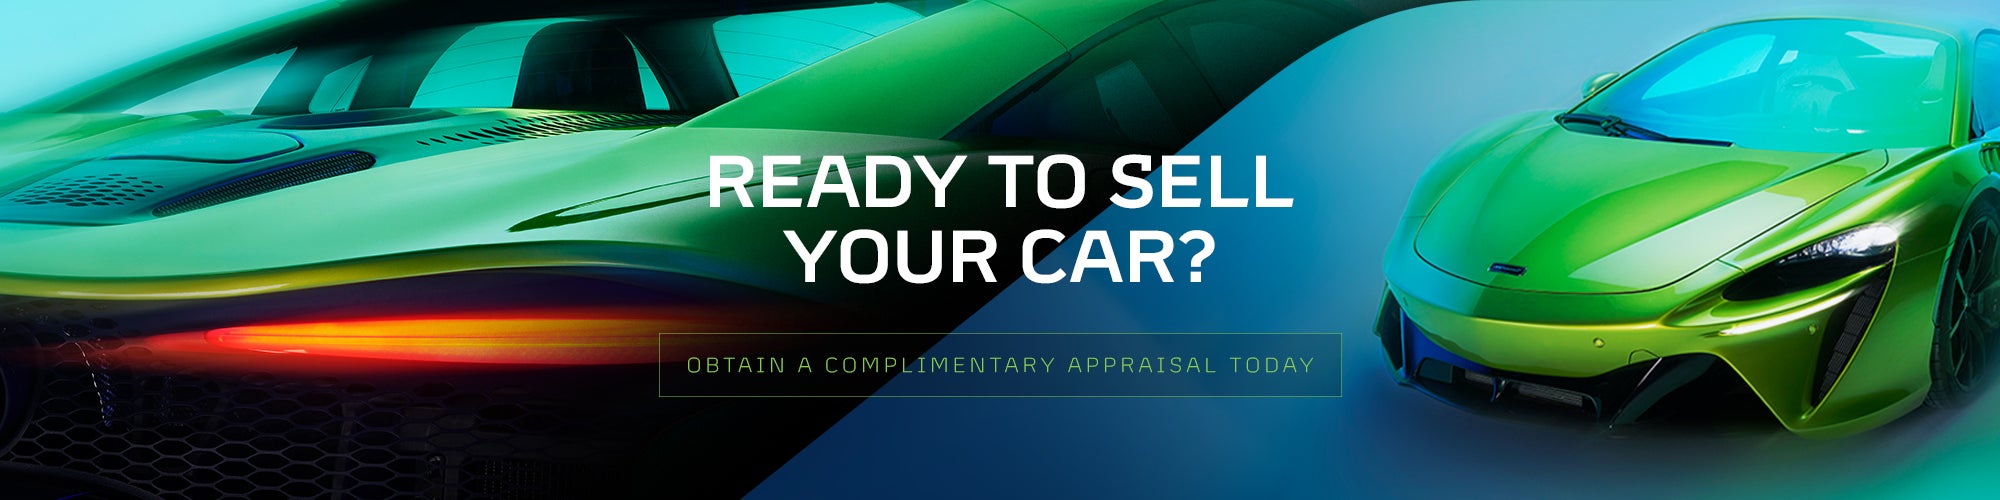 Ready to sell your car?